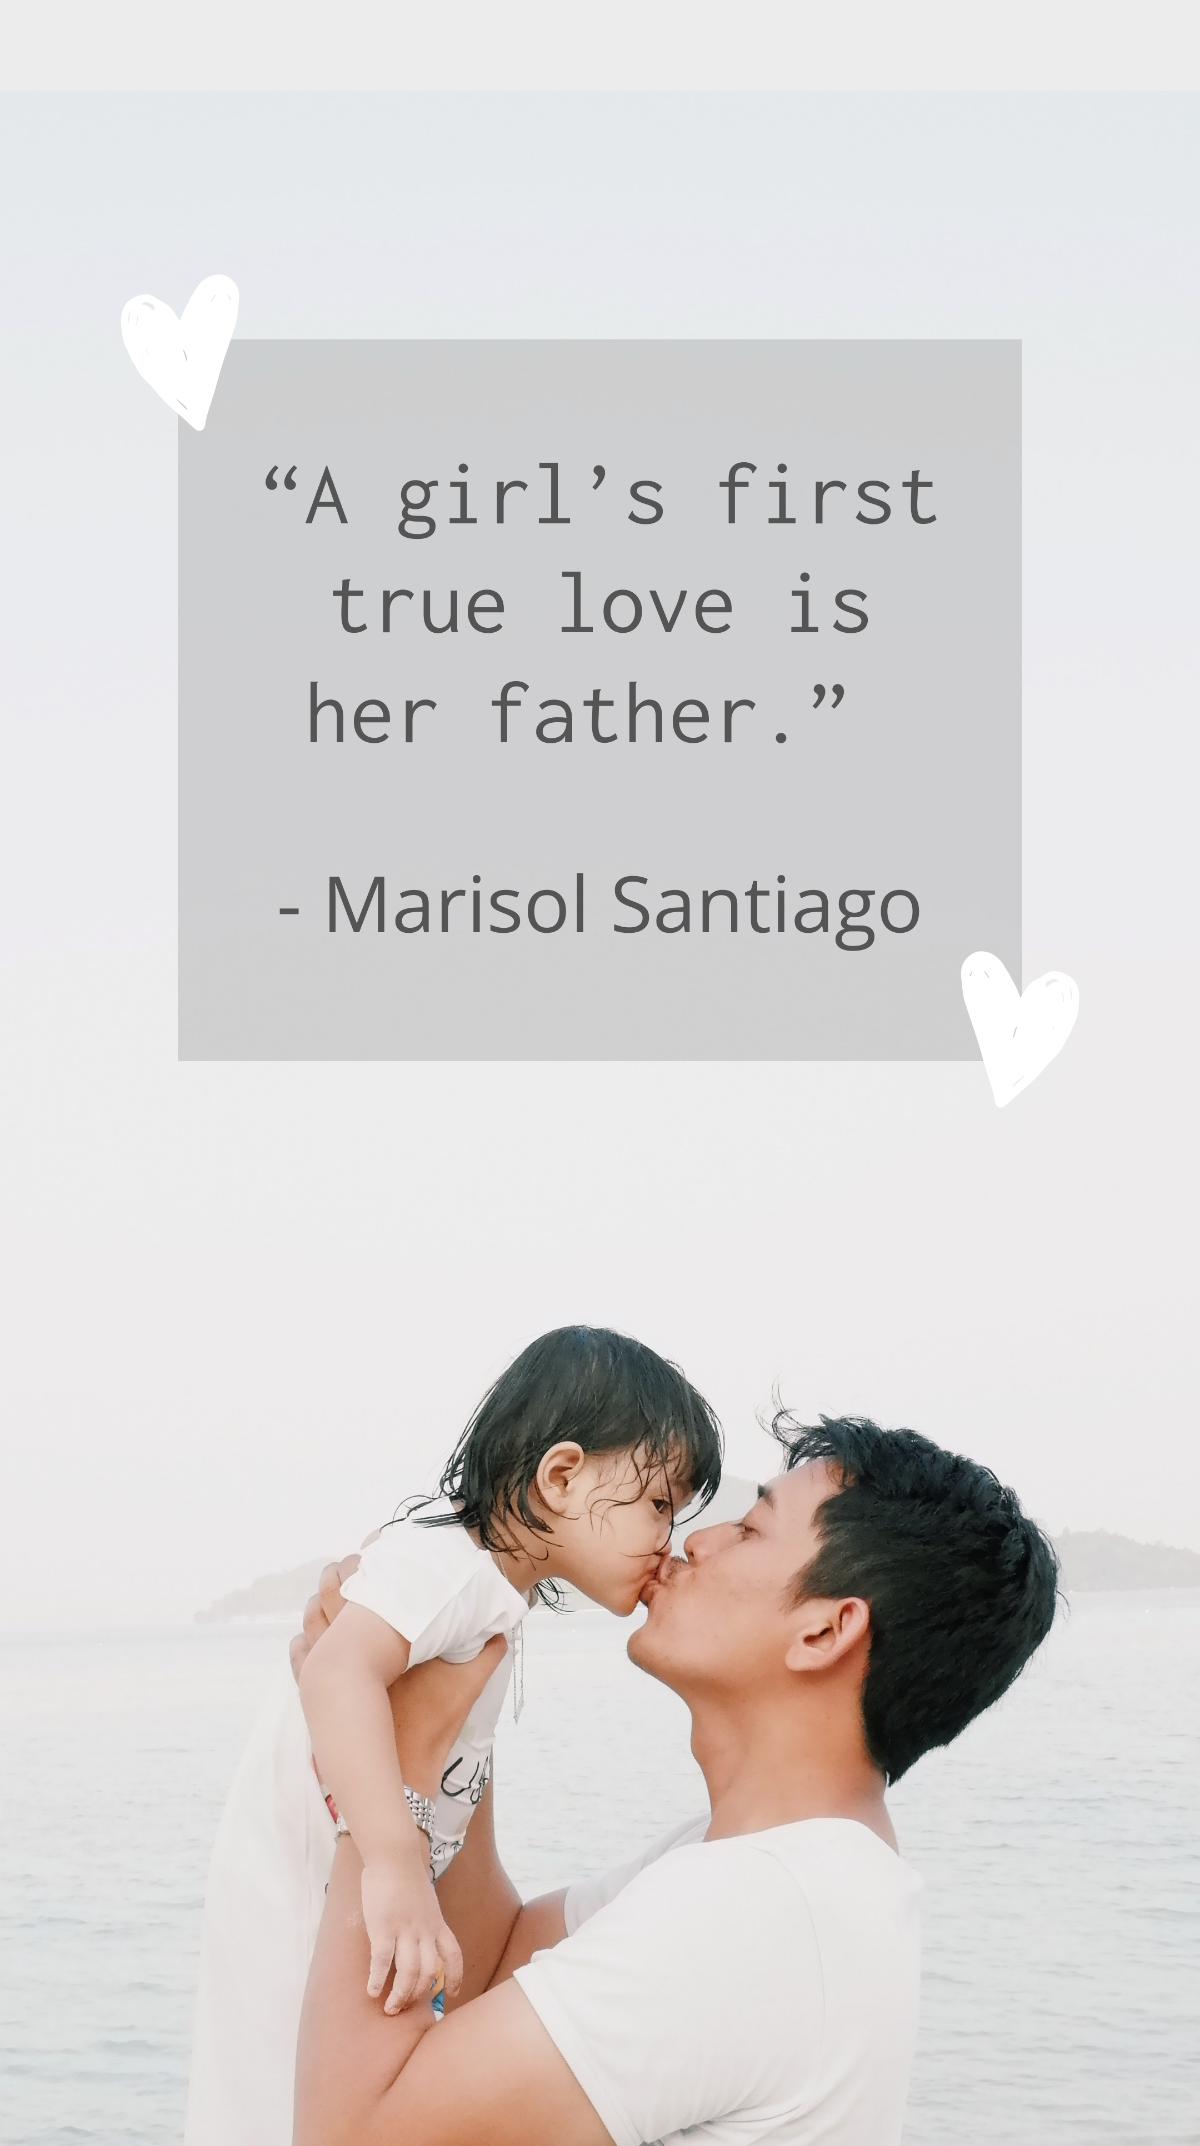 Marisol Santiago  - “A girl’s first true love is her father.” Template